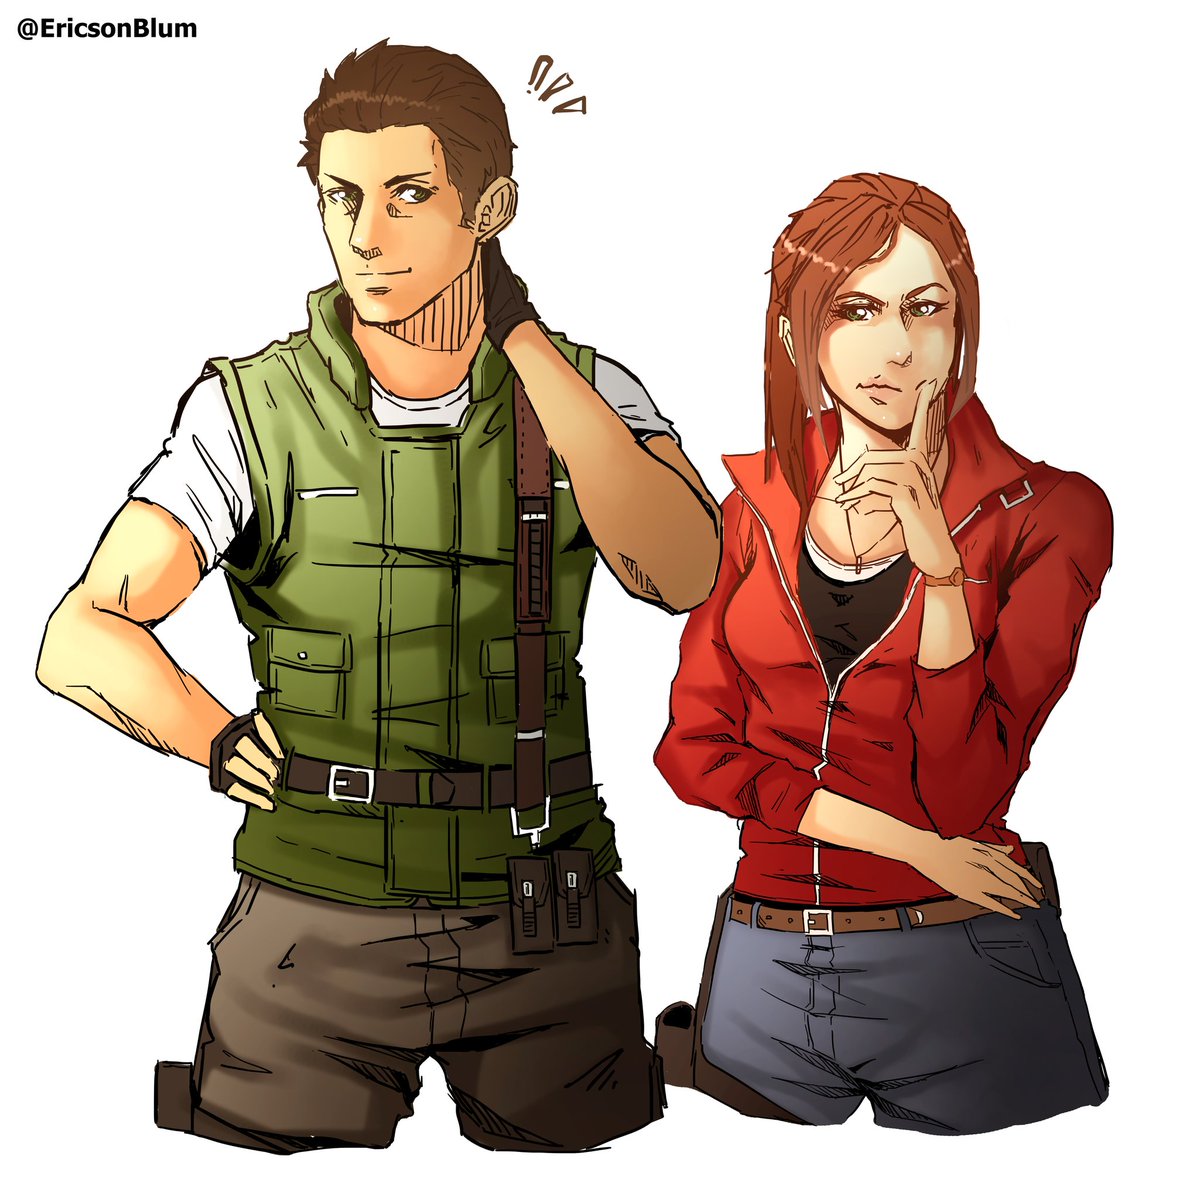 Chris and Claire Redfield! #ResidentEvil #REBH25th